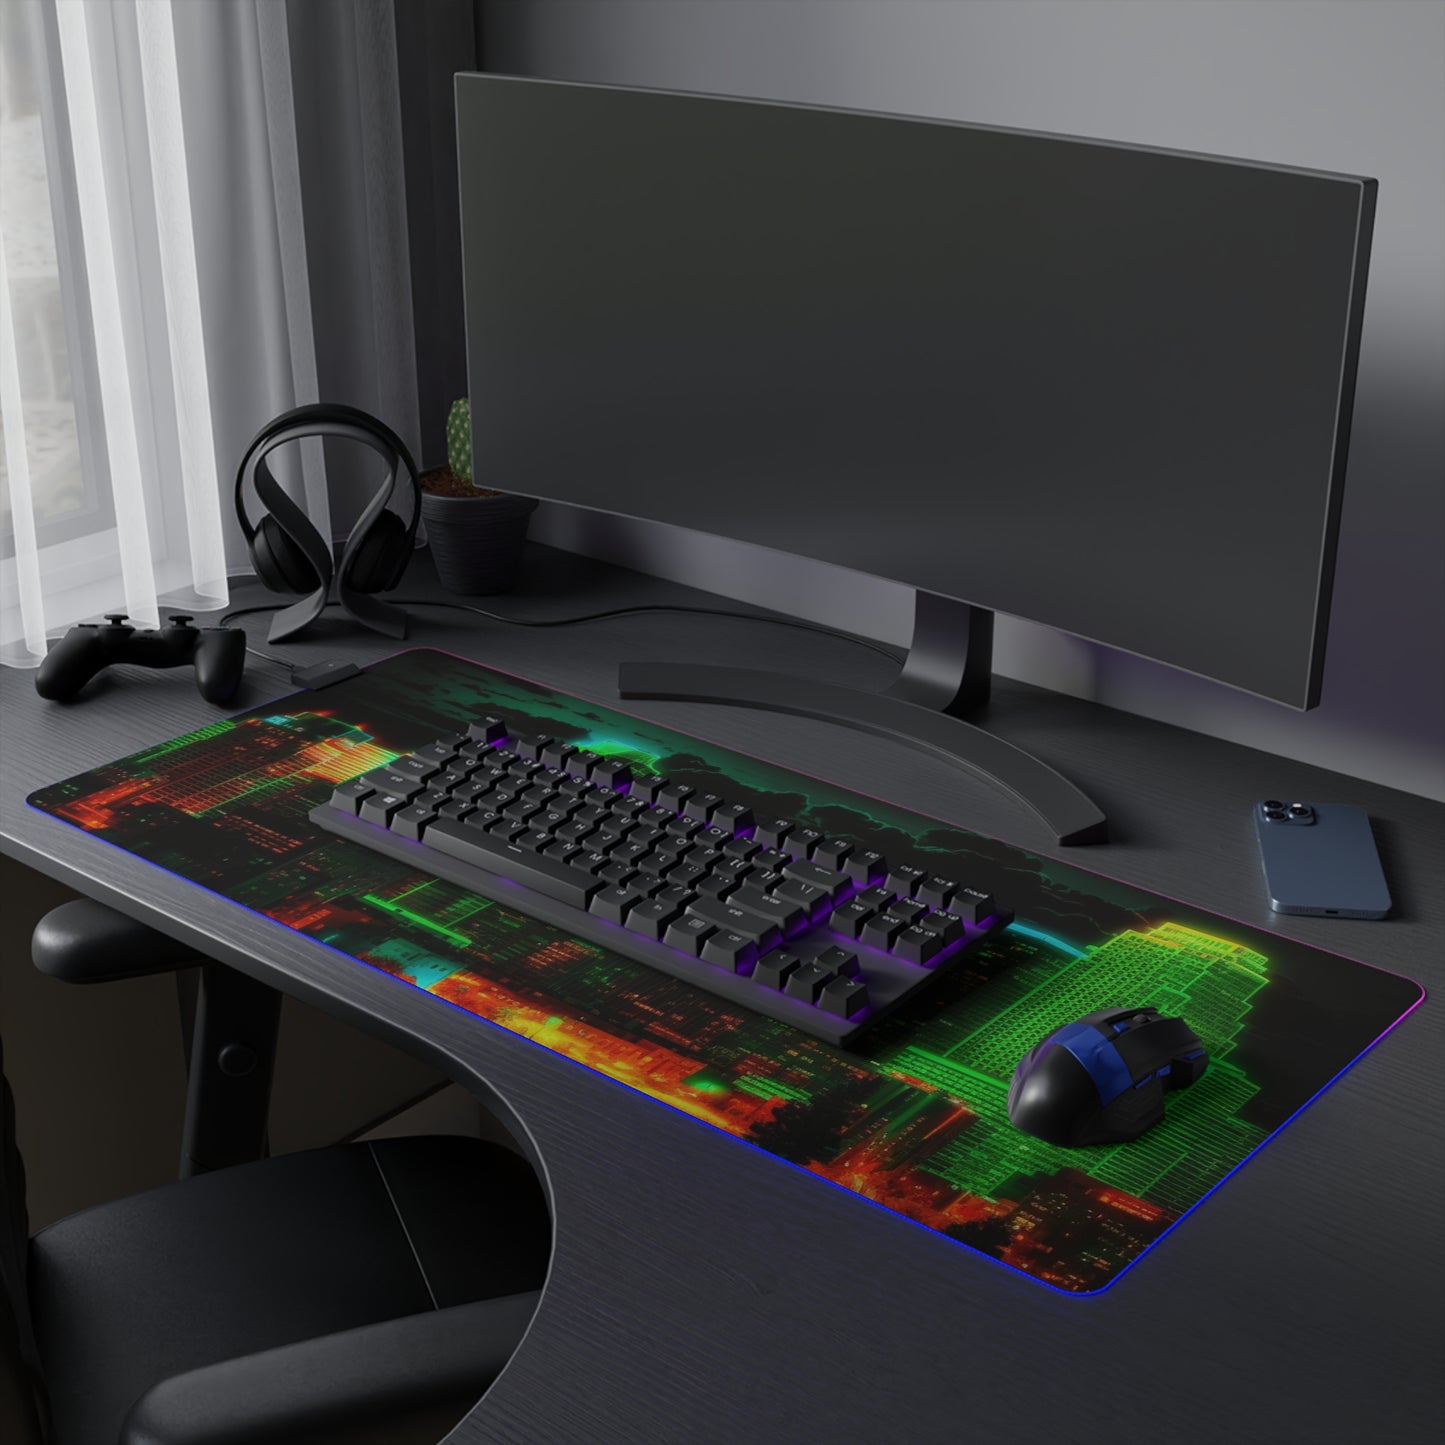 LED Gaming Mouse Pad Neon Denver 3